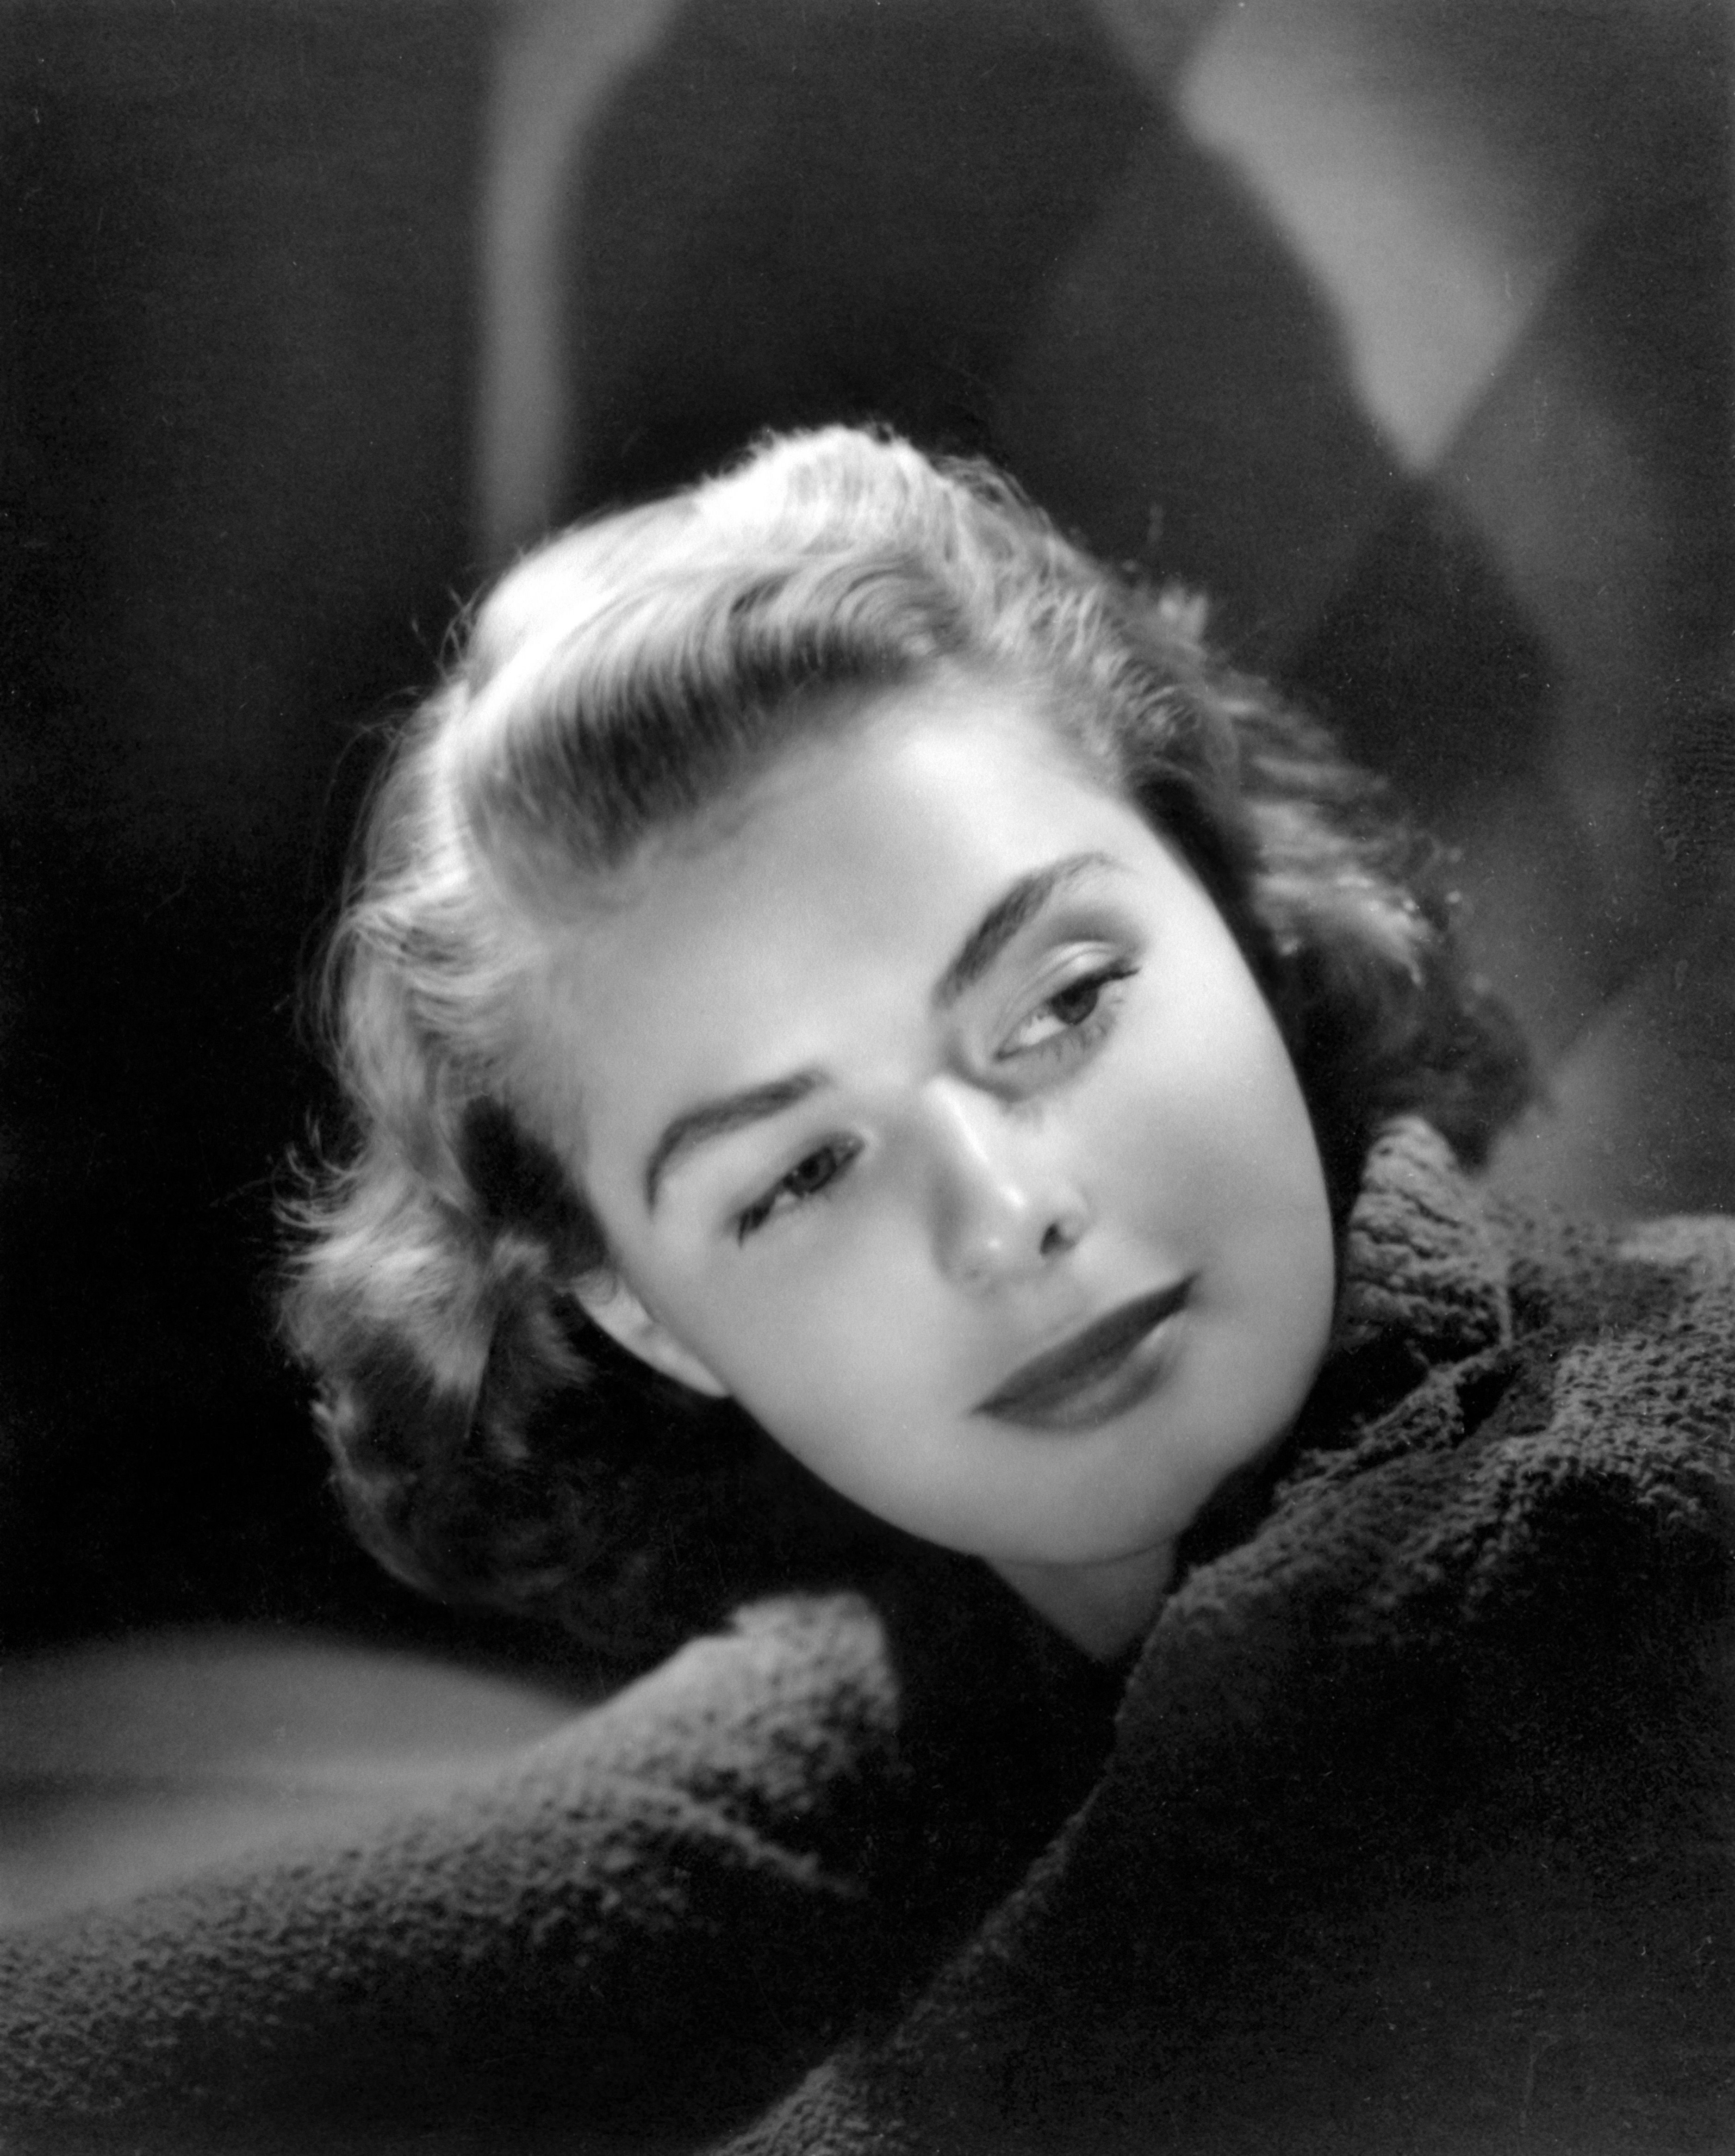 Ingrid Bergman, Swedish actress and film star poses for a portrait on January 01, 1940. | Photo: Getty Images